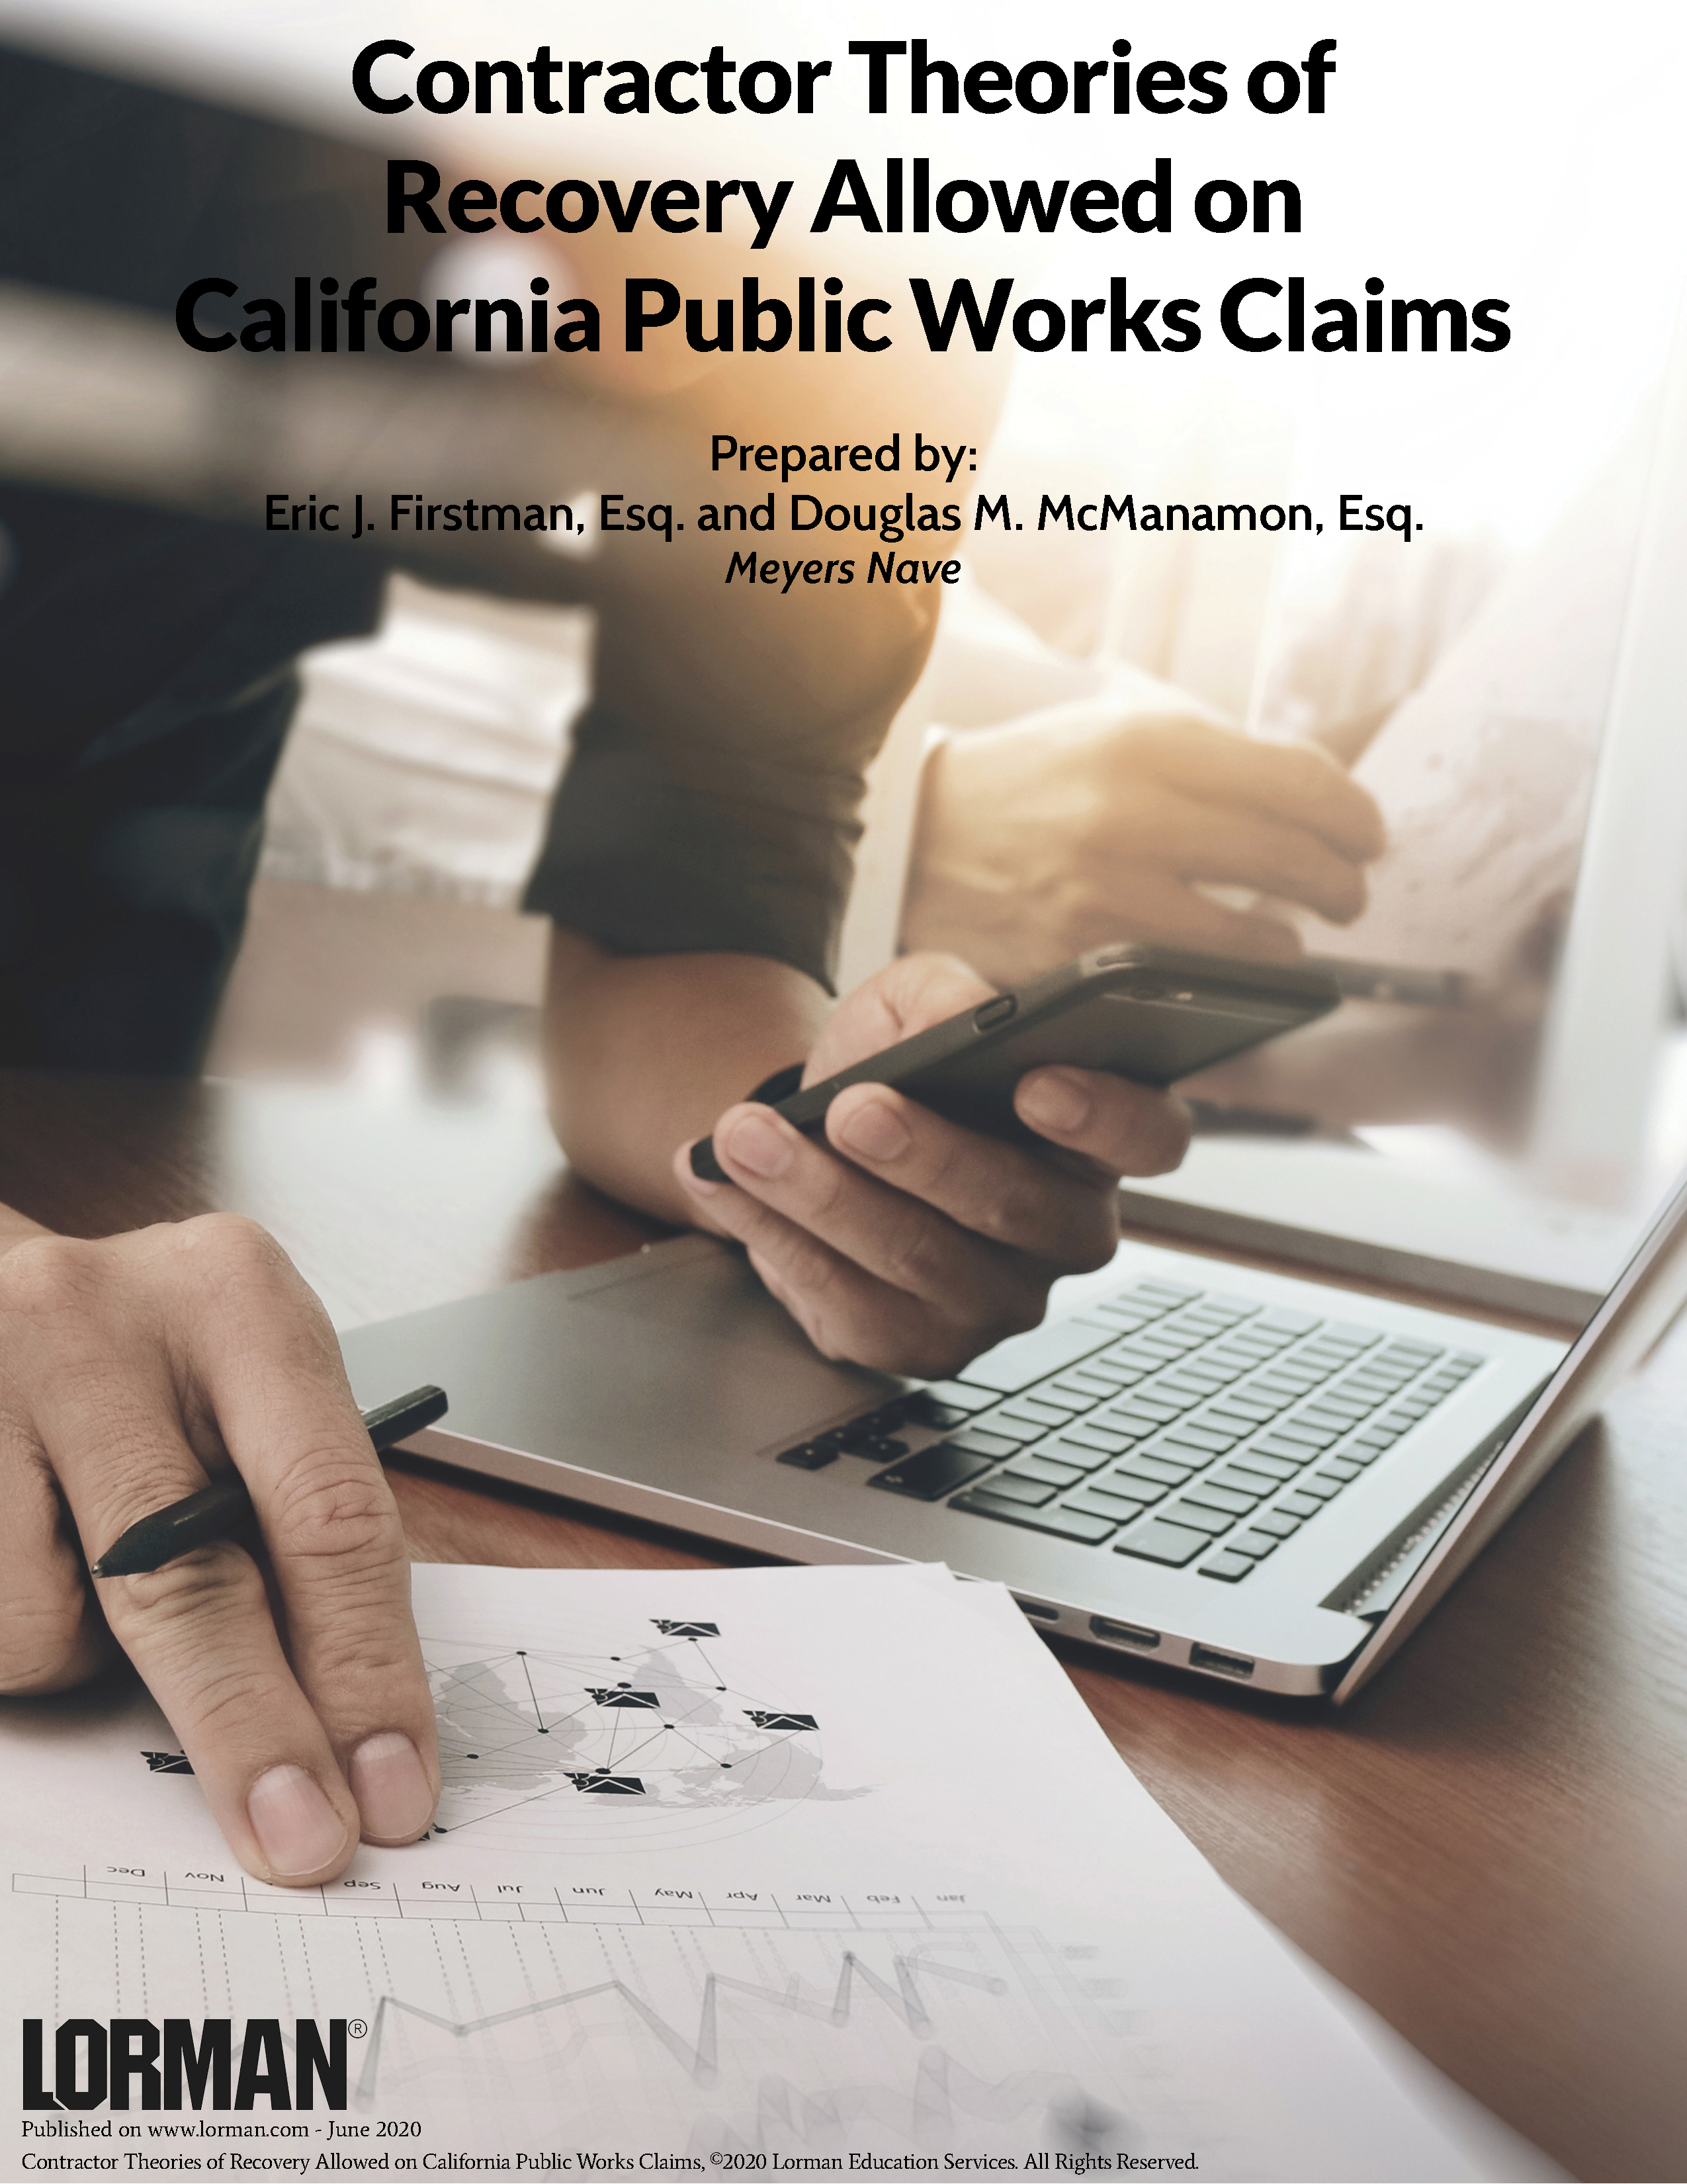 Contractor Theories of Recovery Allowed on California Public Works Claims